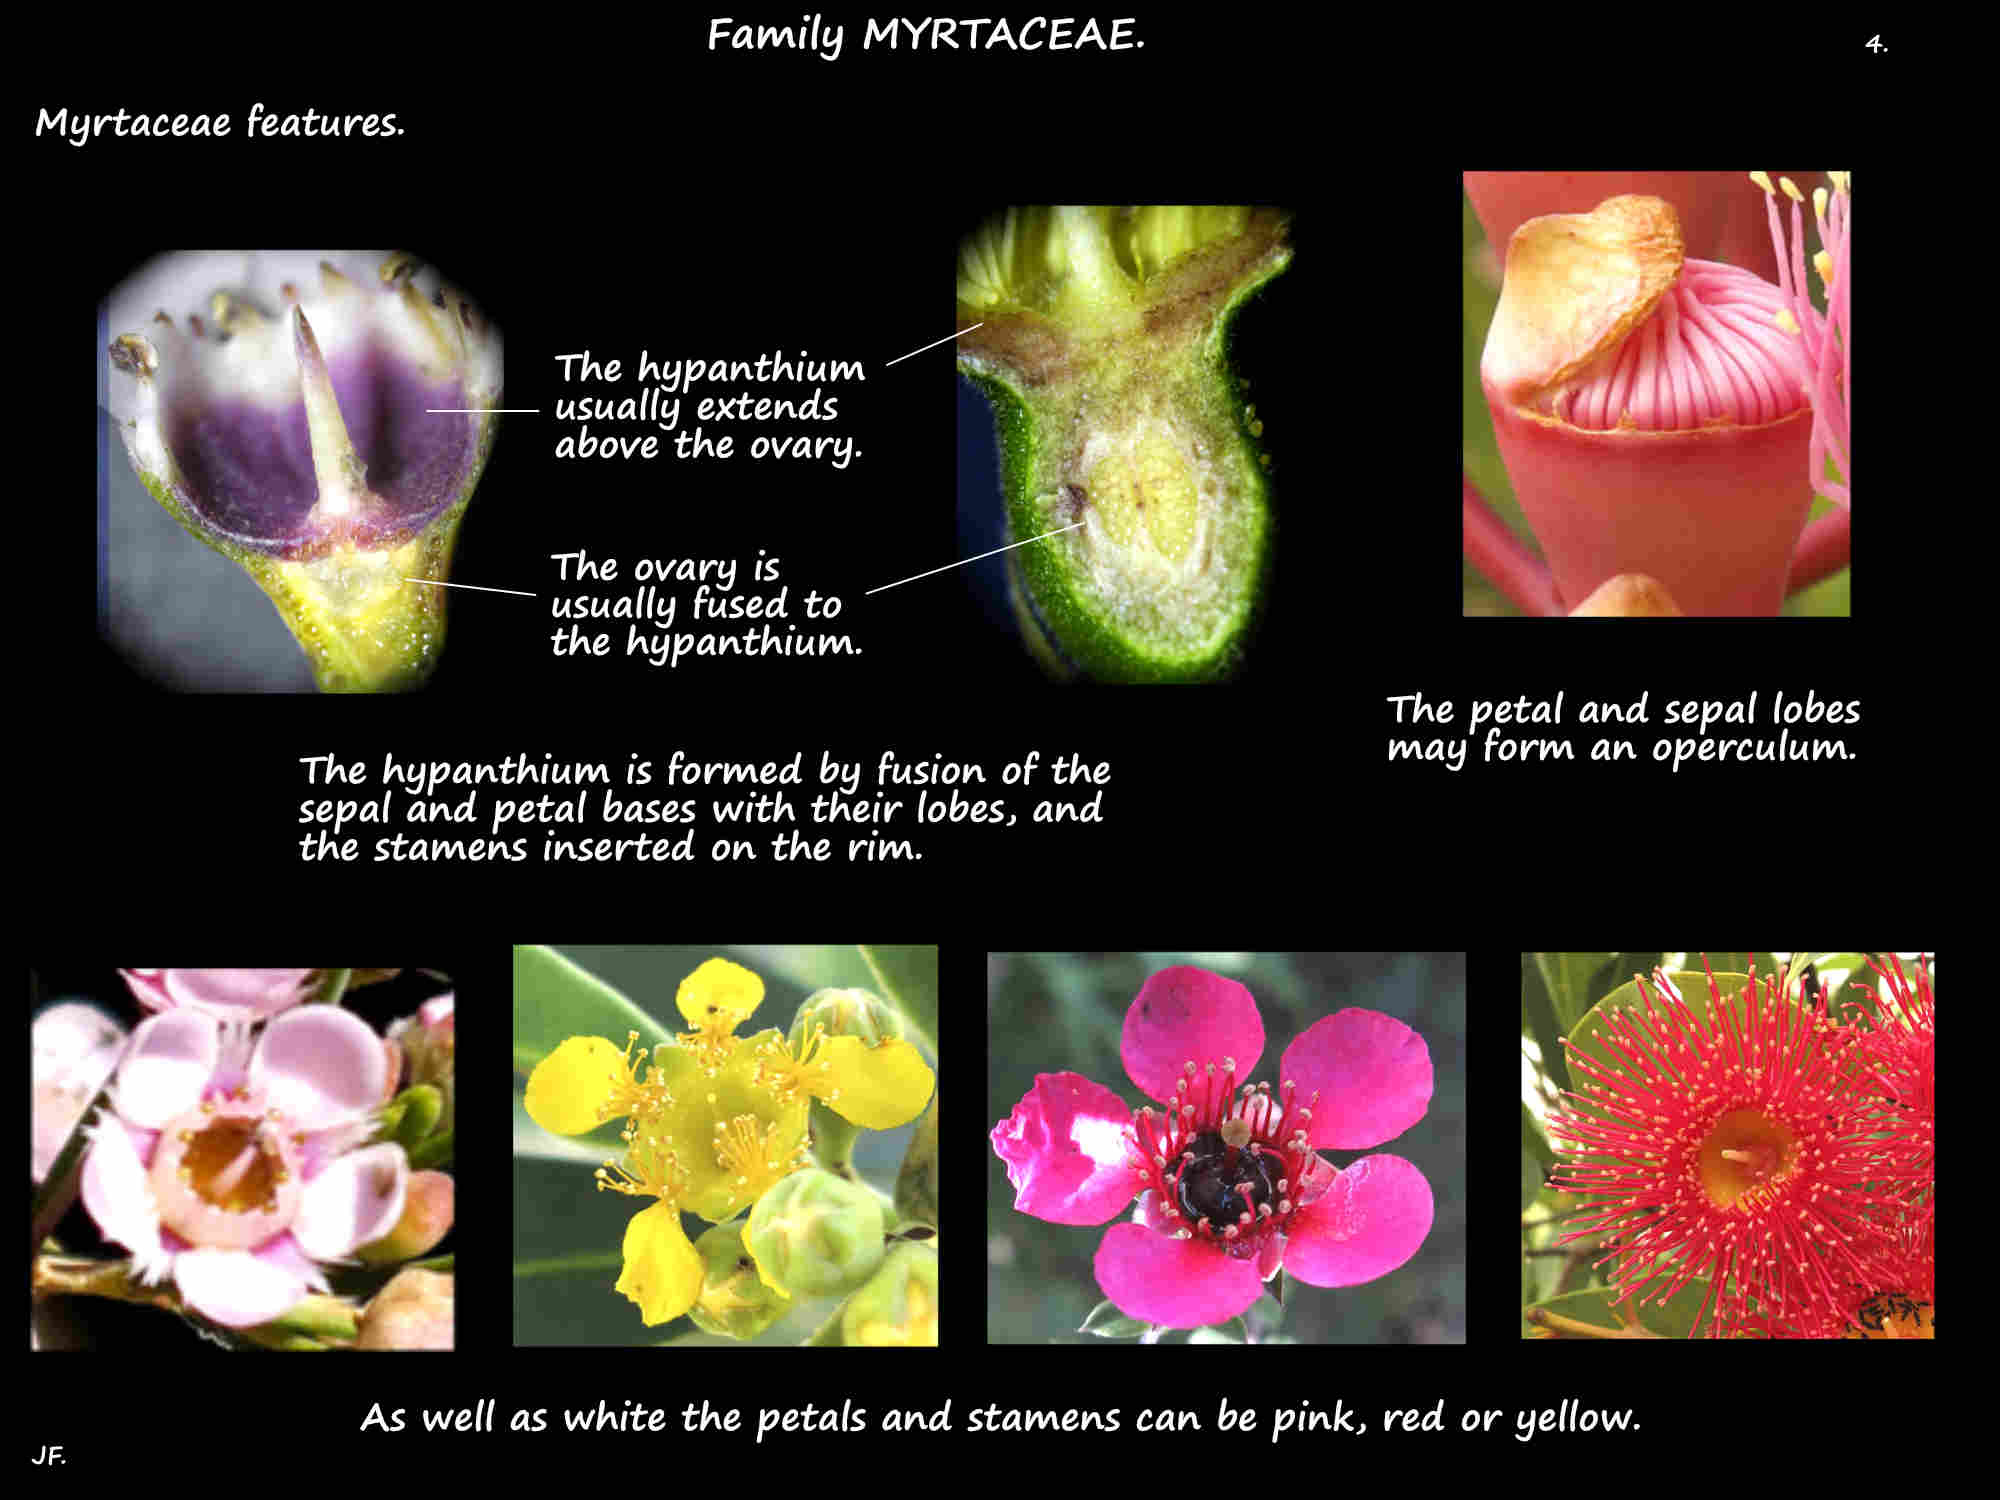 4 The hypanthium in Myrtaceae flowers